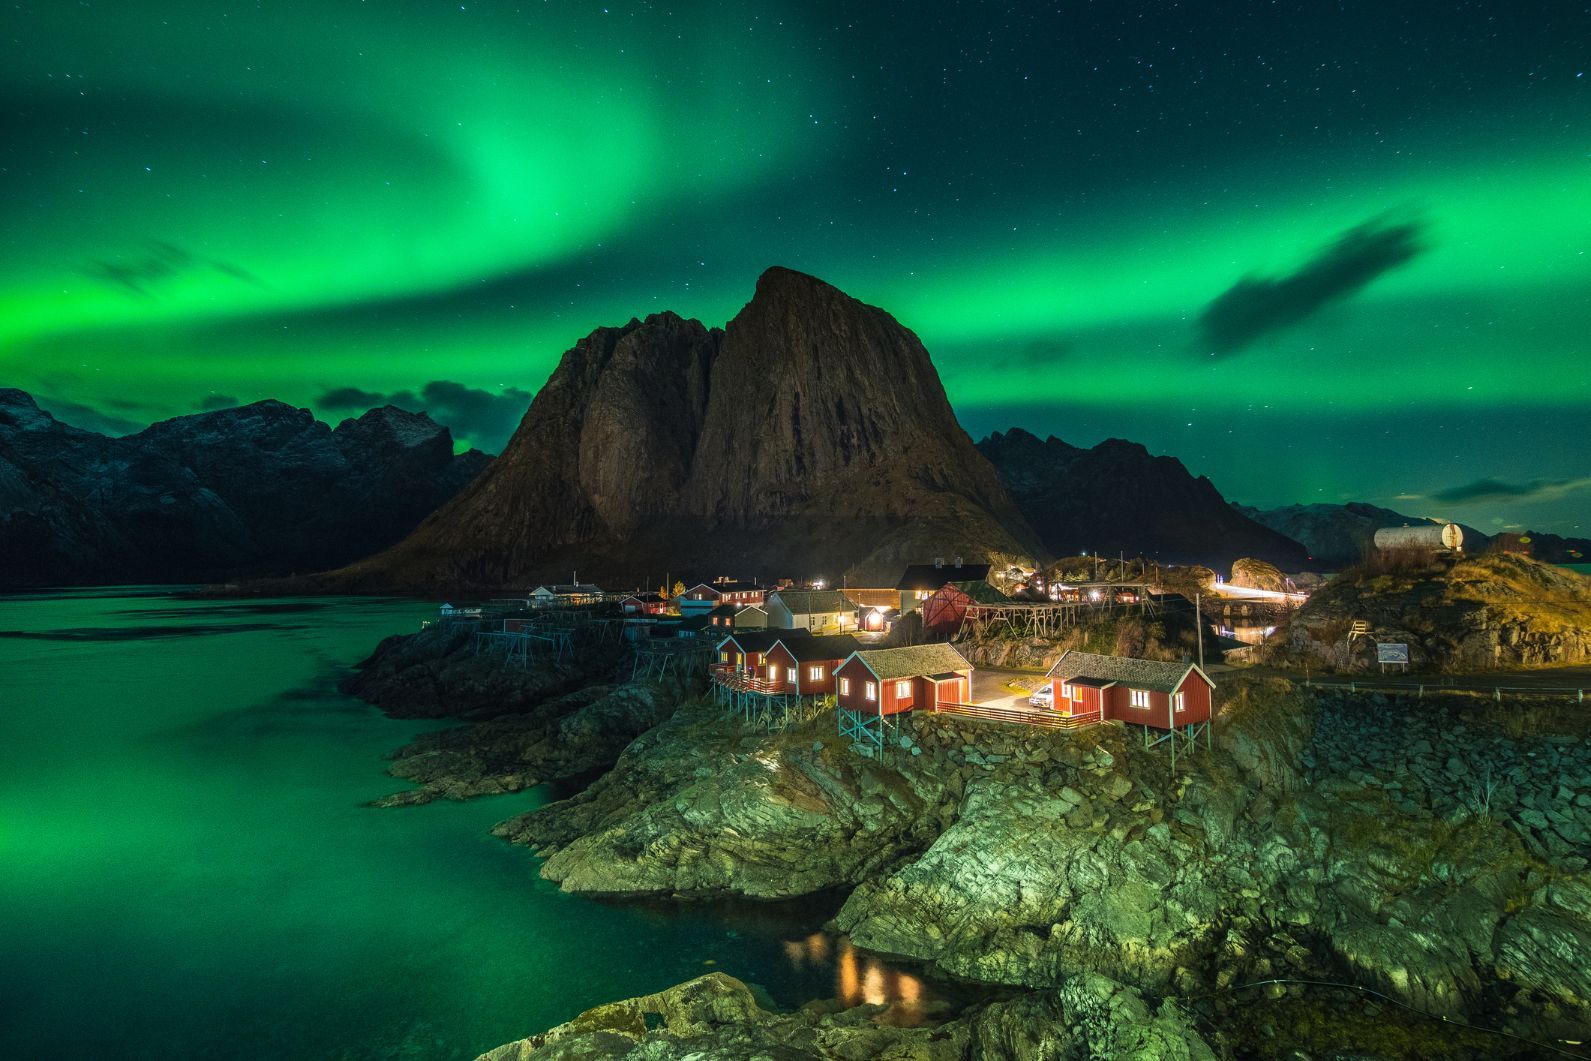 The beautiful colours of the northern lights, best views in Lofoten from September to April